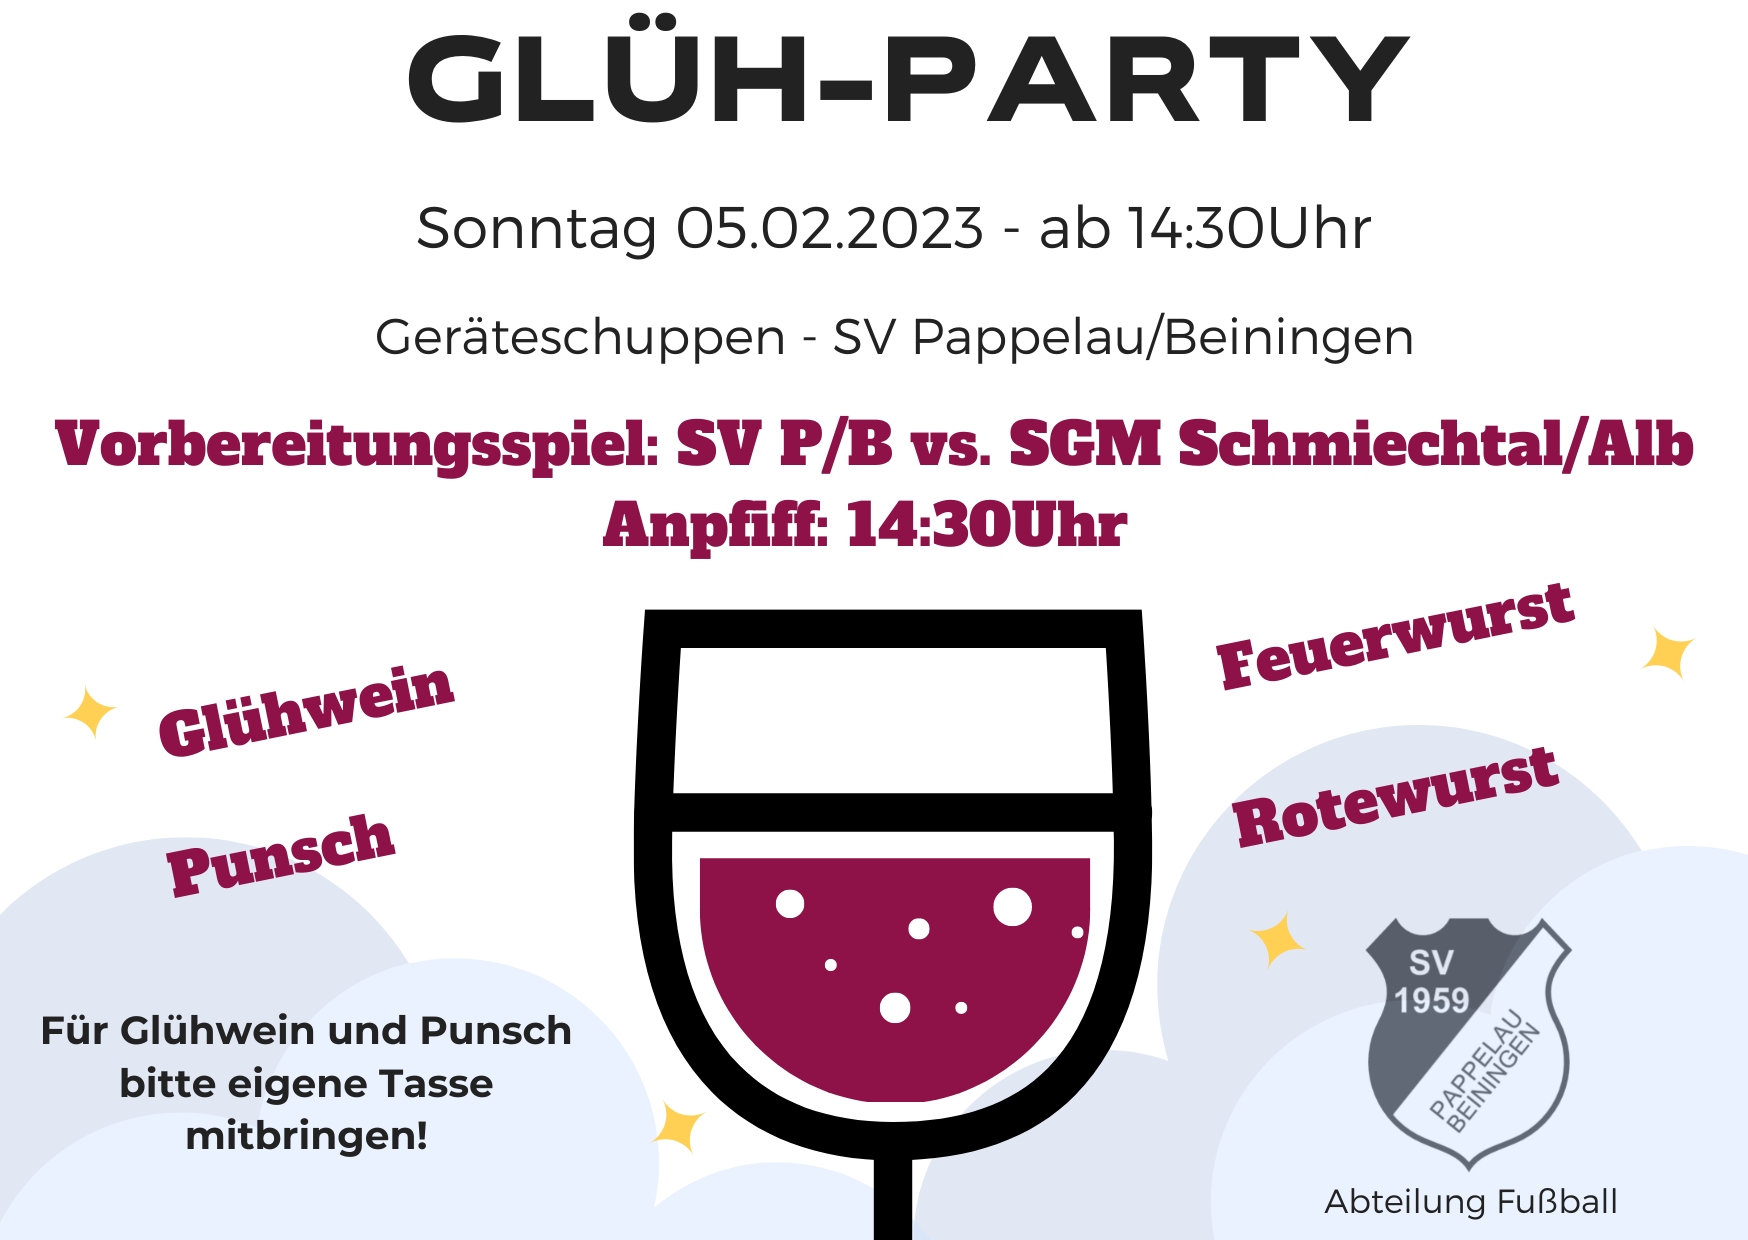 gluehparty 2022